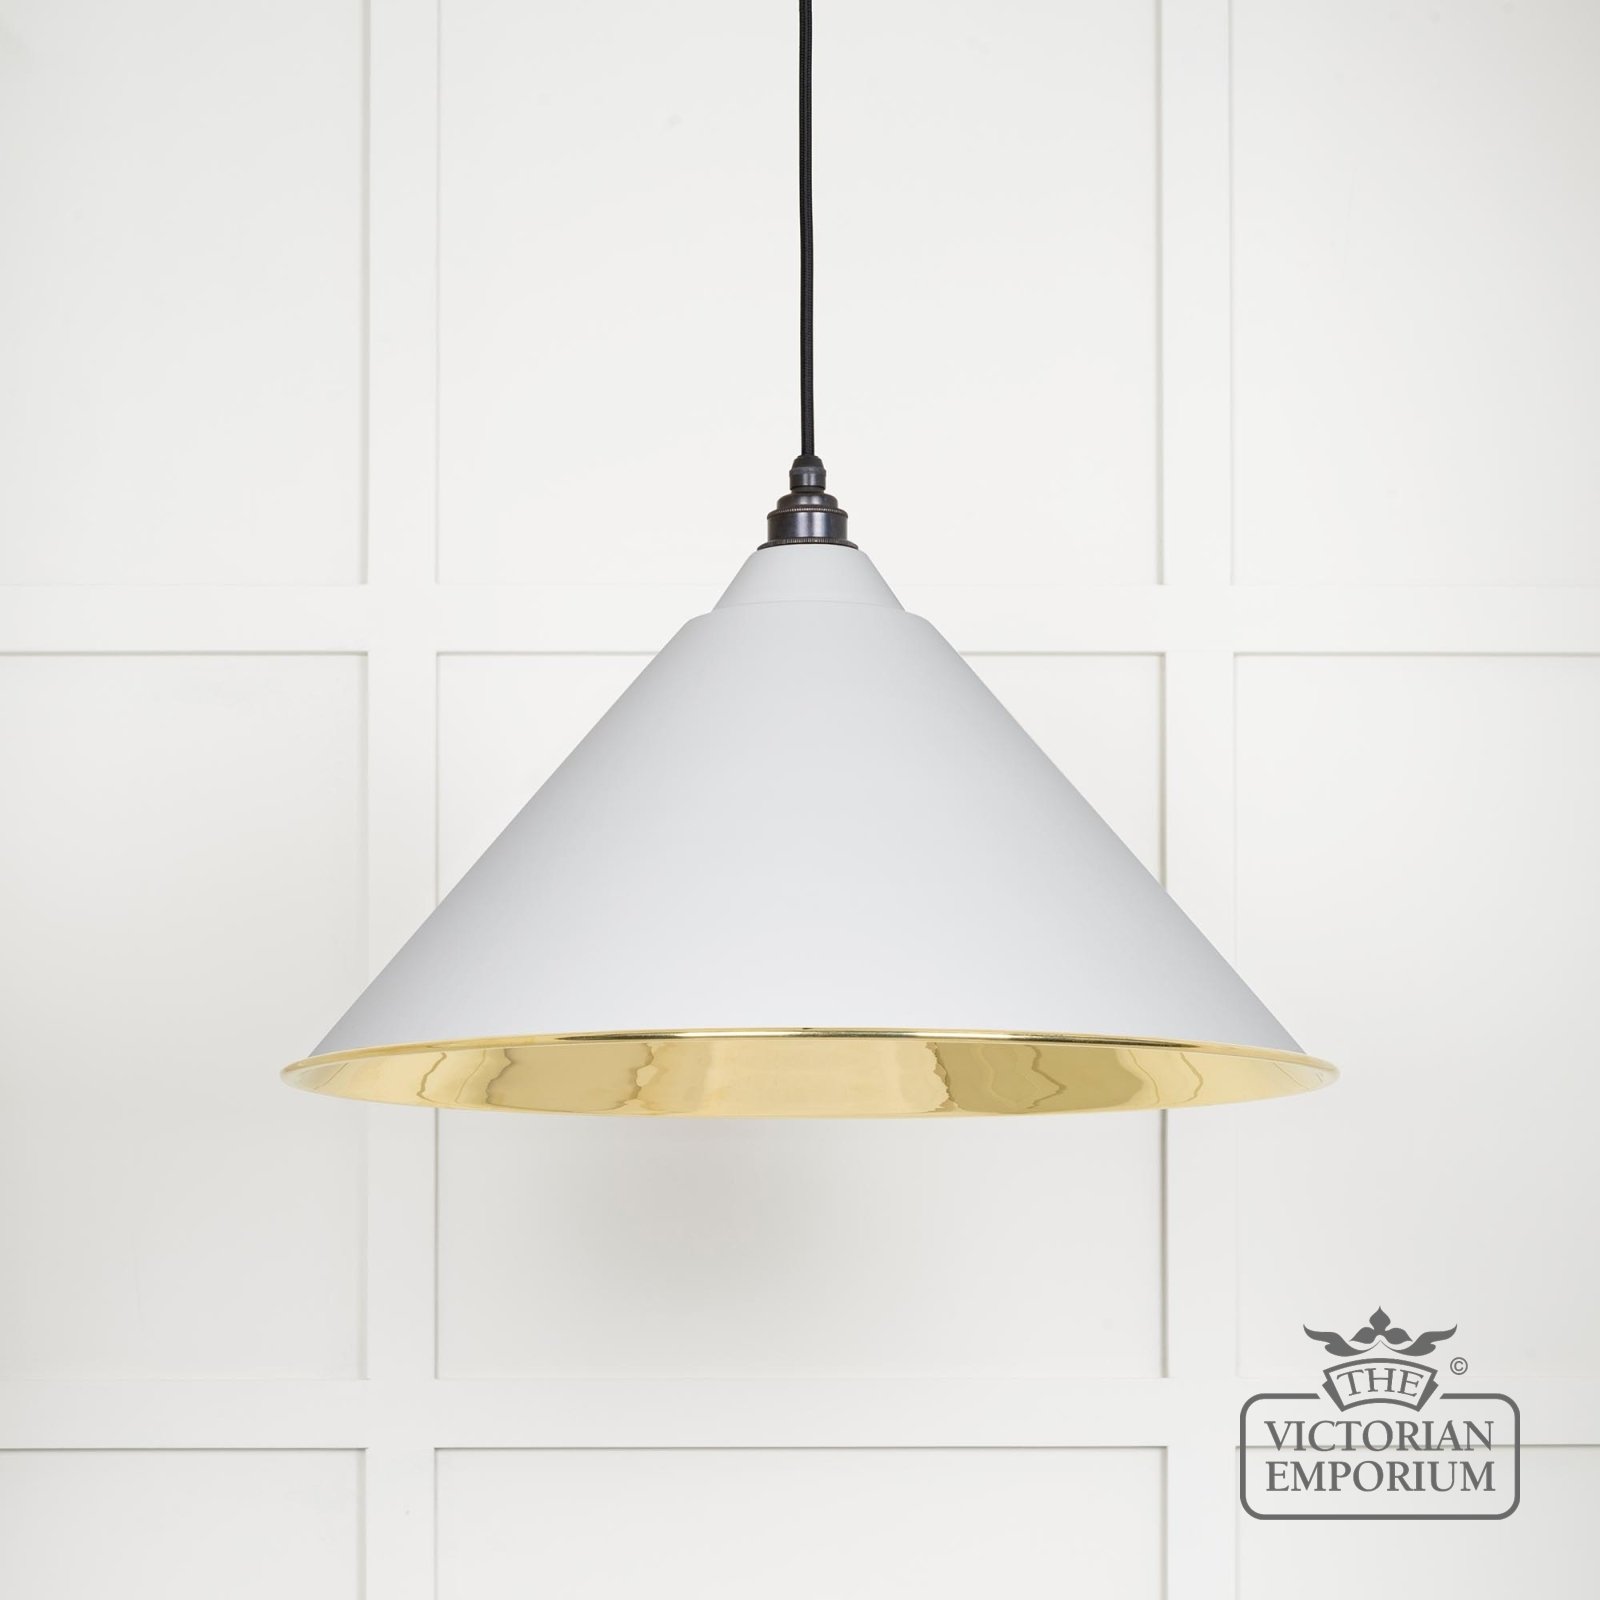 Hockliffe pendant light in Flock and Smooth Brass